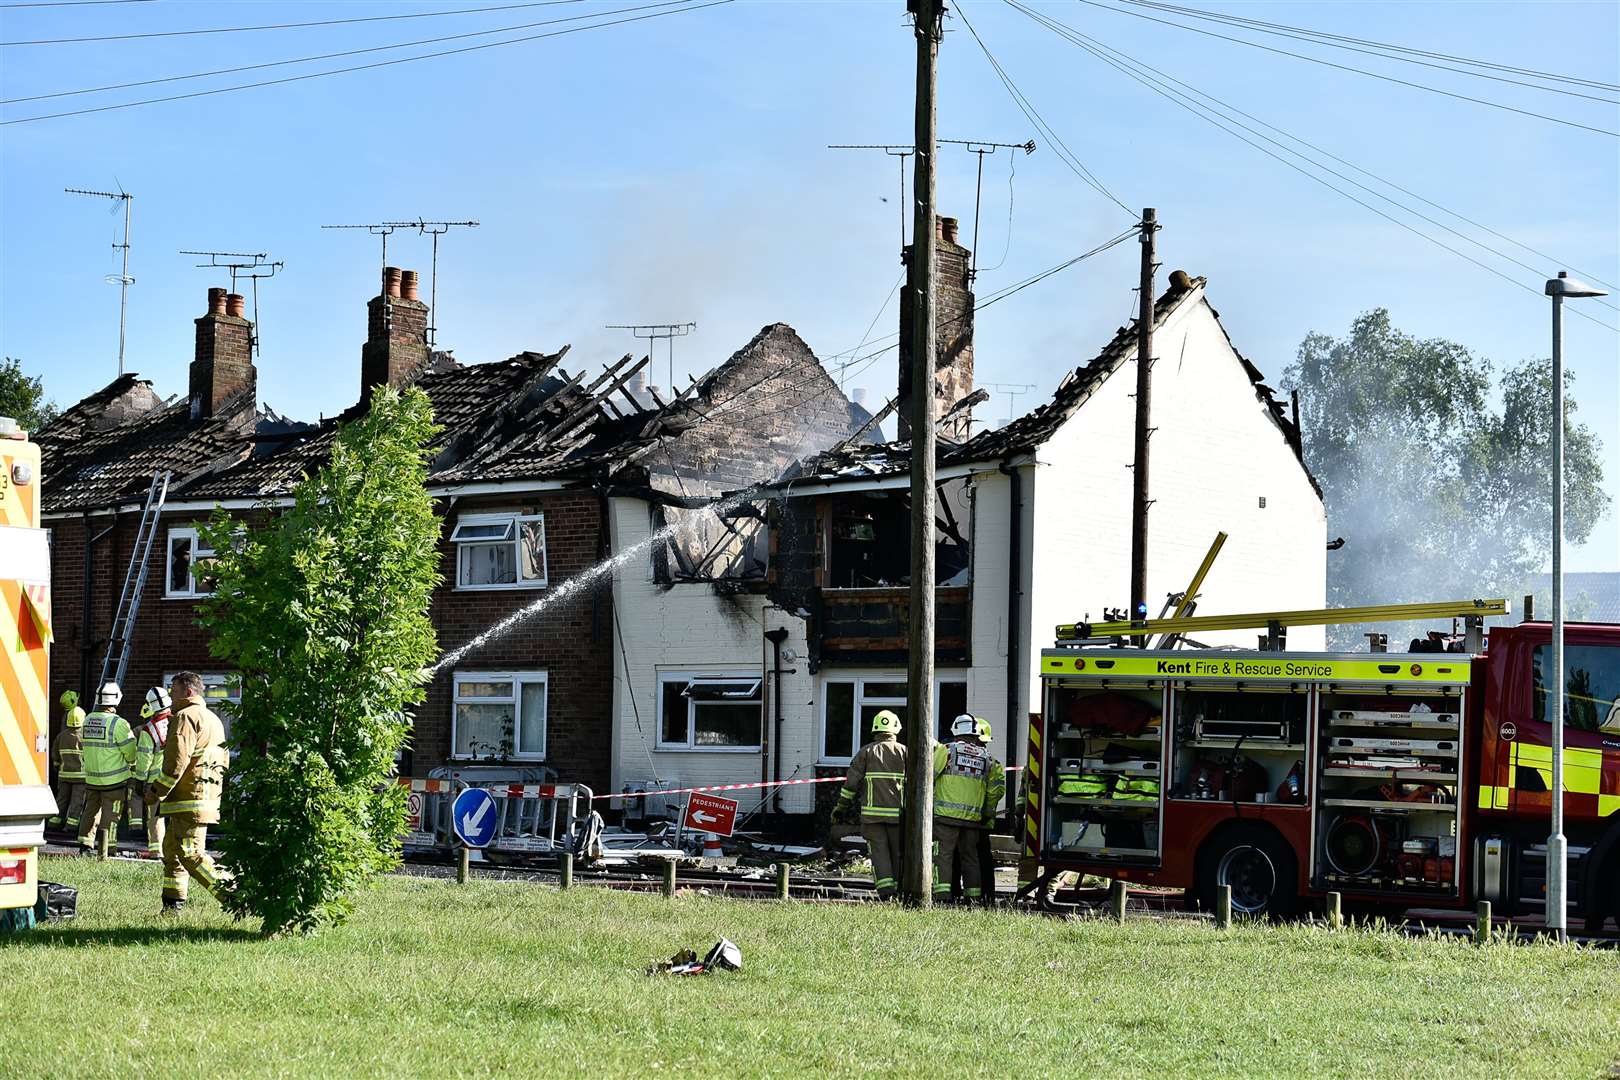 Fire crews battled to fight the fires caused by the 2015 blast in Ashford